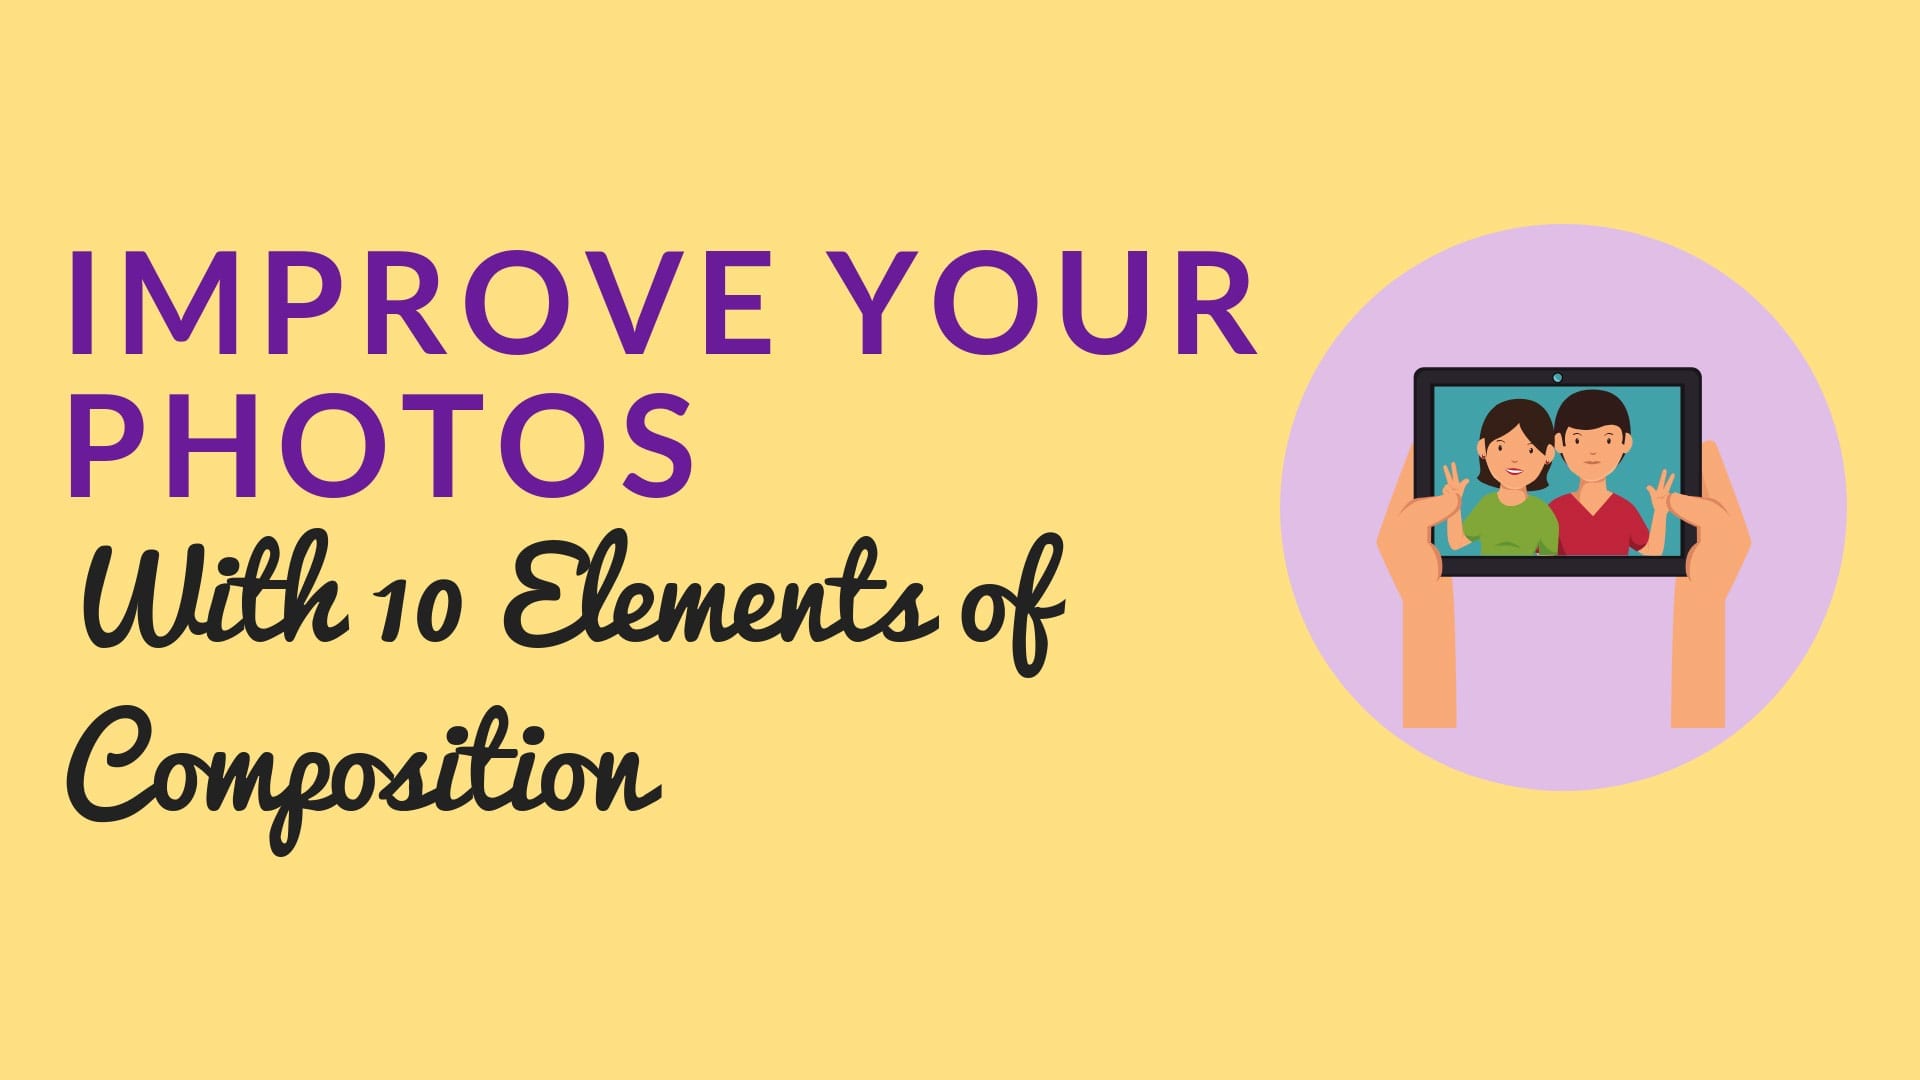 Improve Your Photos With 10 Elements of Composition